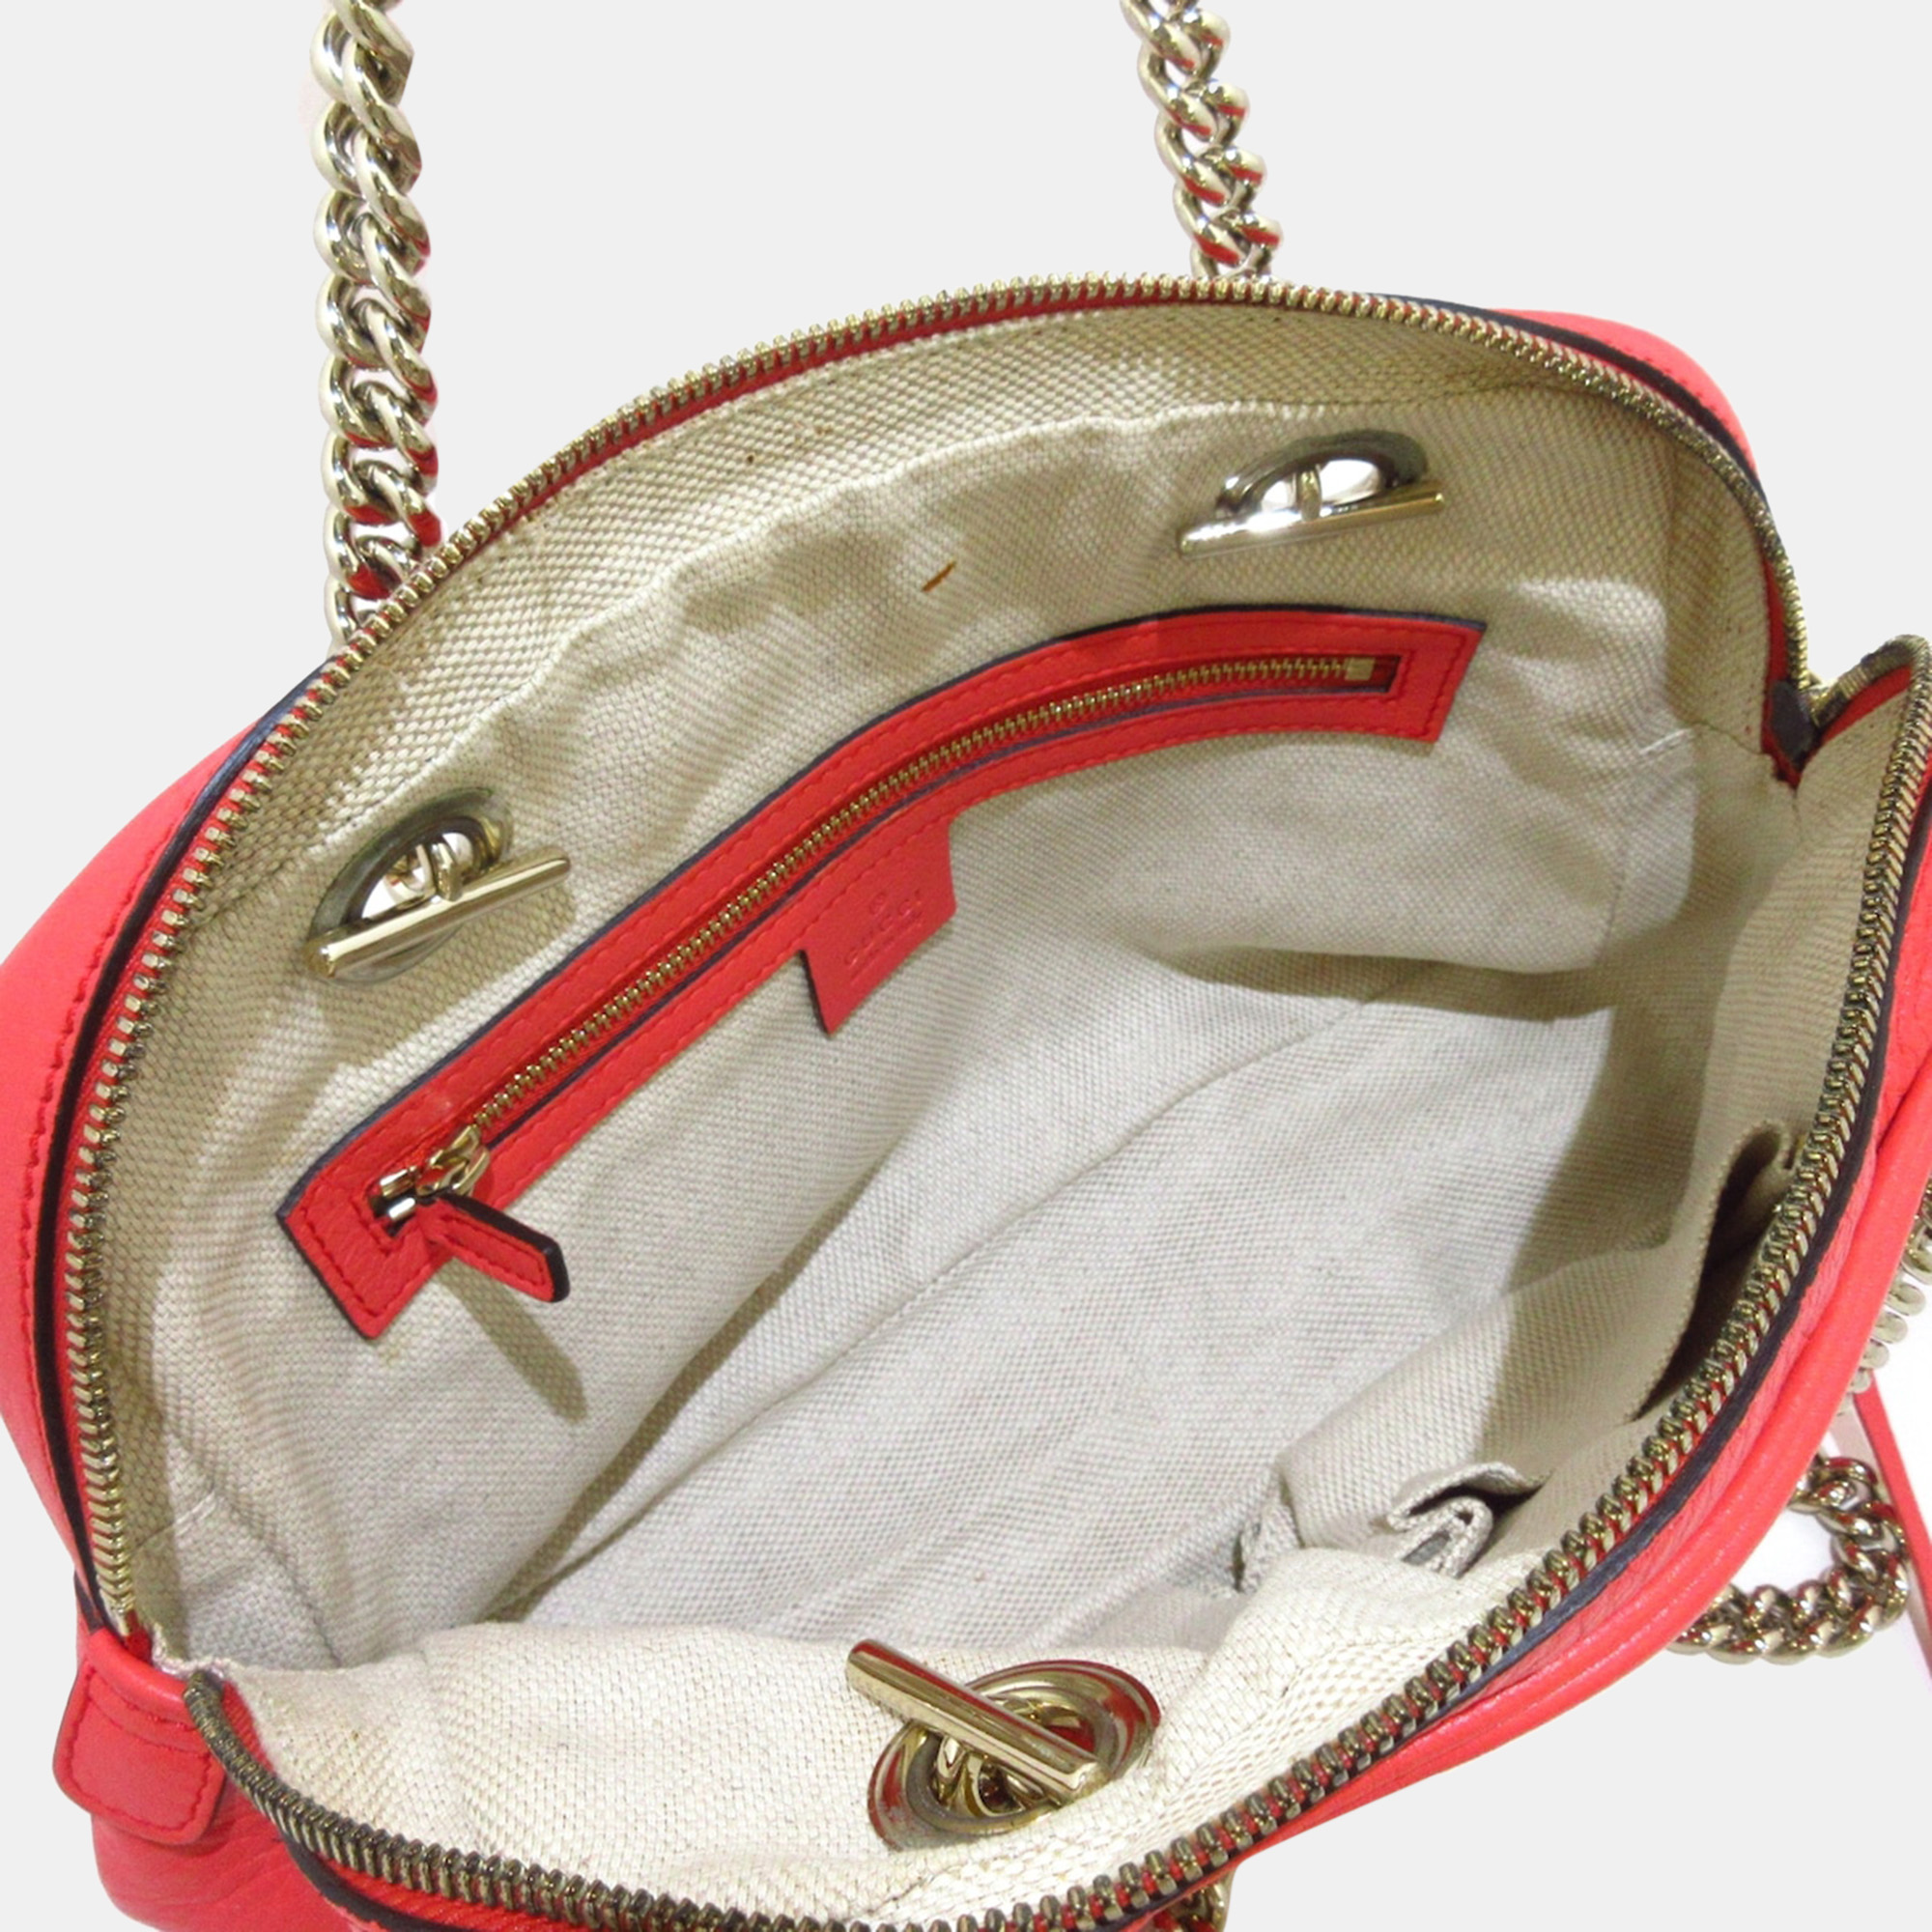 Gucci Red Leather Soho Chain Shoulder Bag